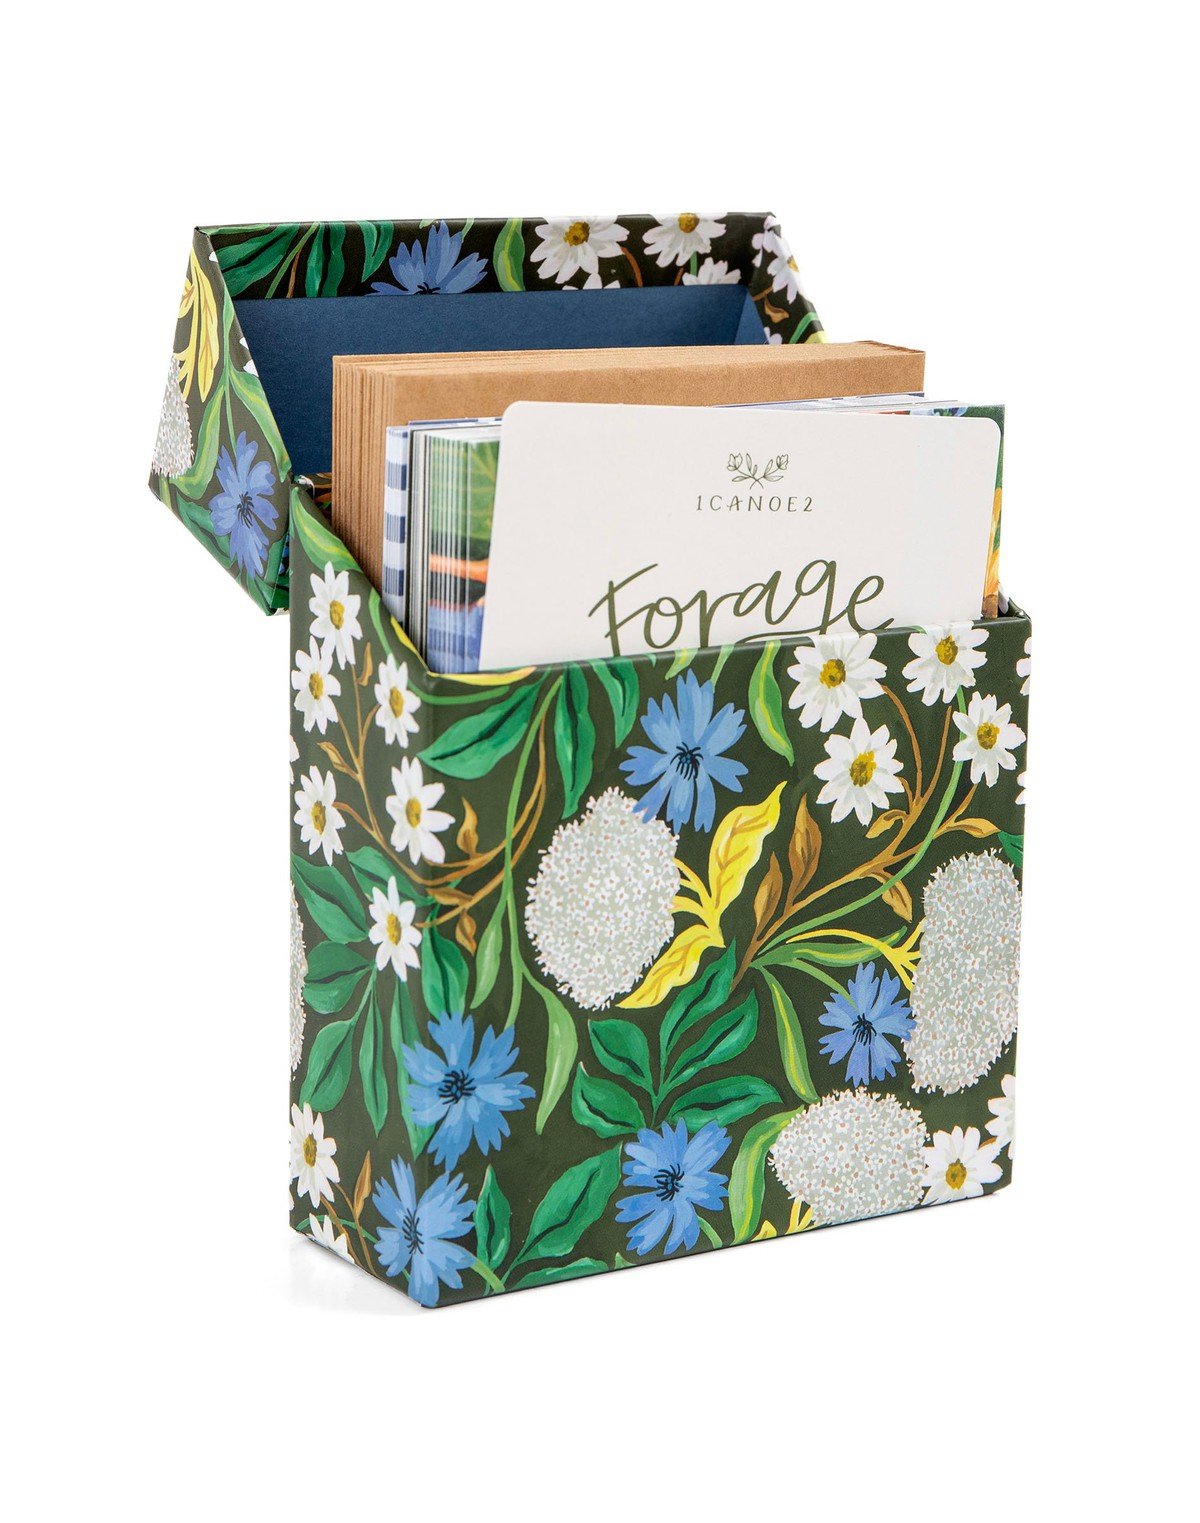 Forage Specialty Greeting Card Box Set item